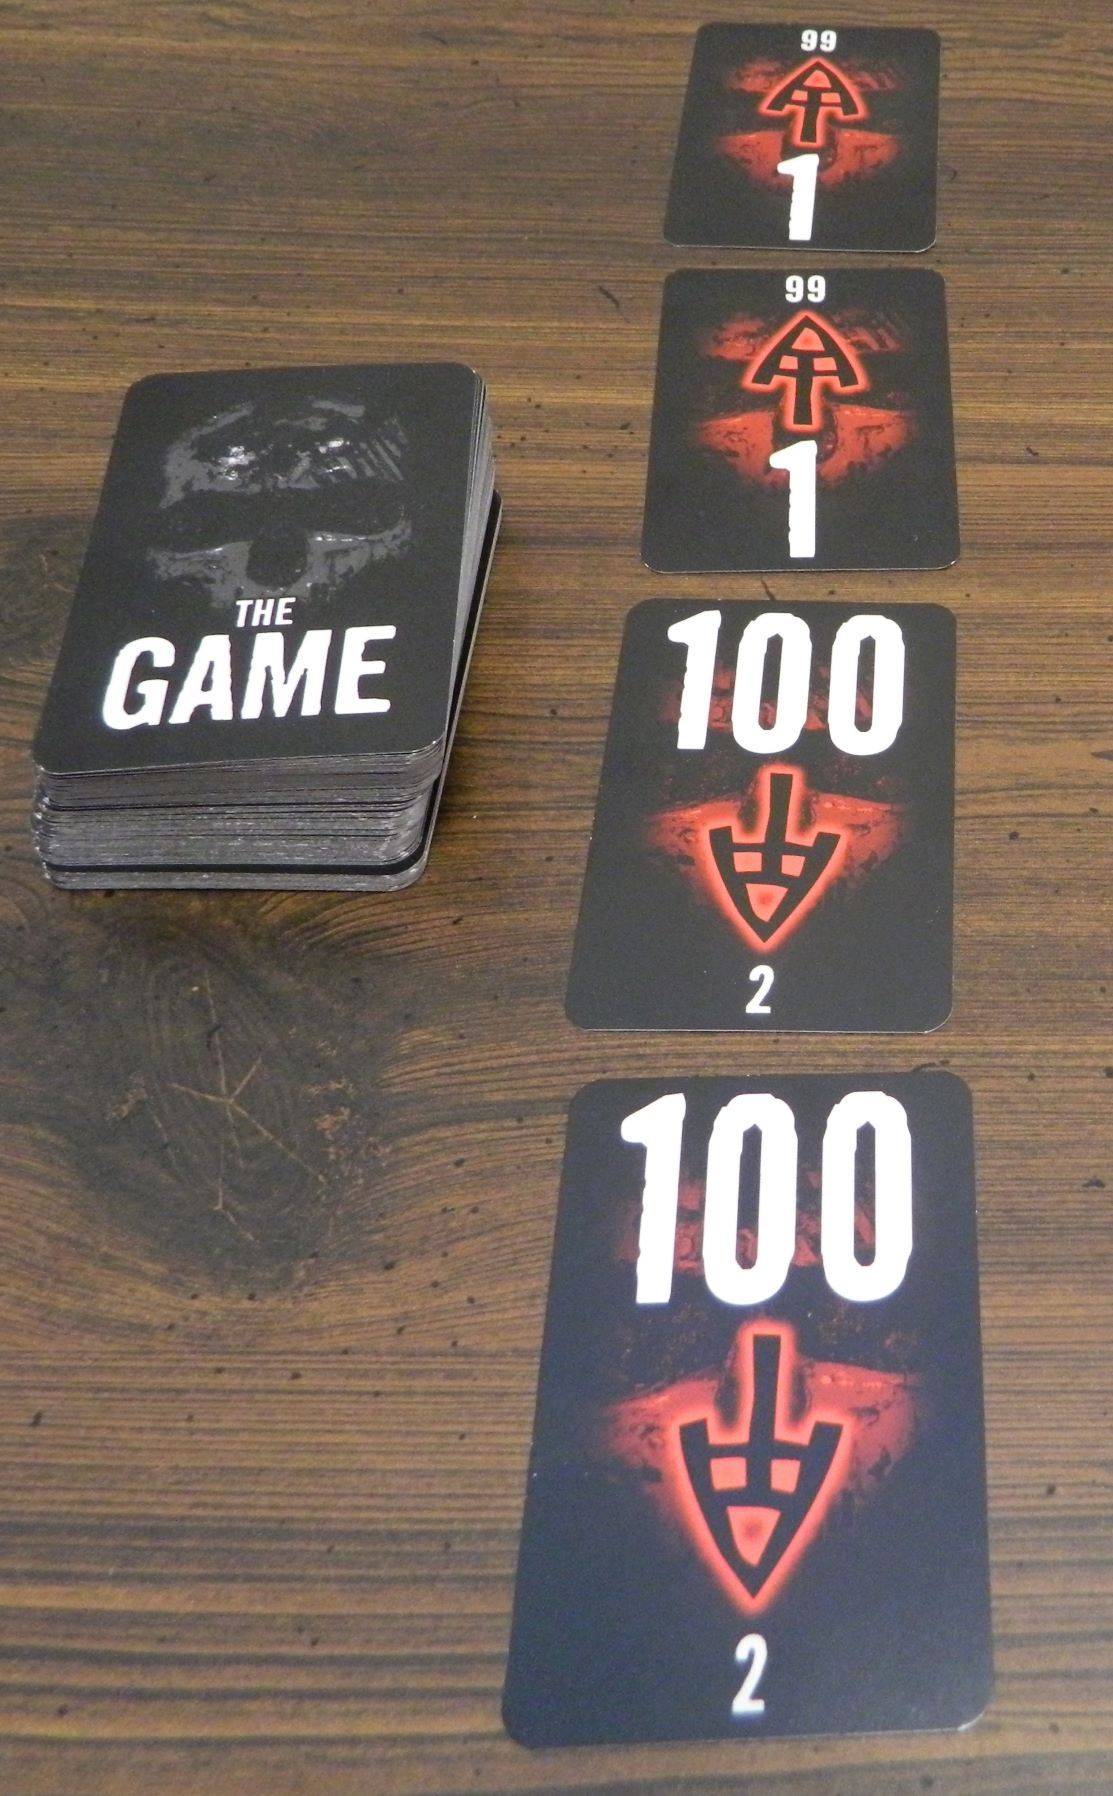 The Game (2015, Steffen Benndorf) Card Game Review and Rules | Geeky ...